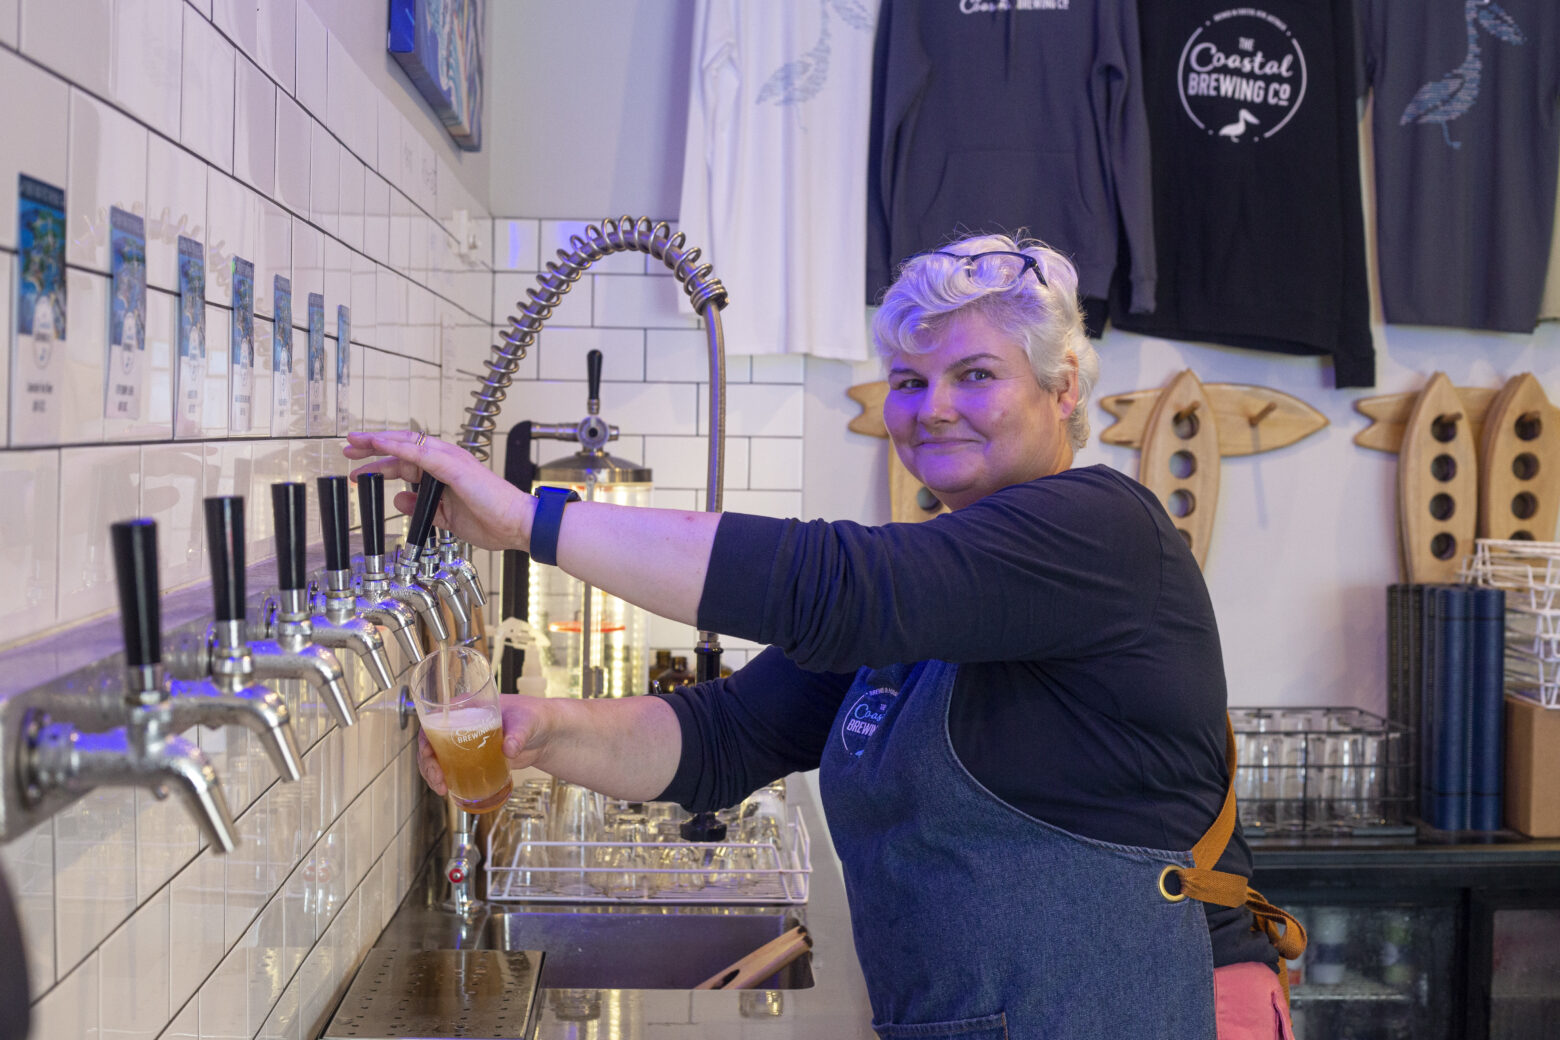 Craft beers brewed in Forster by David and Helen Black from The Coastal Brewing Company.